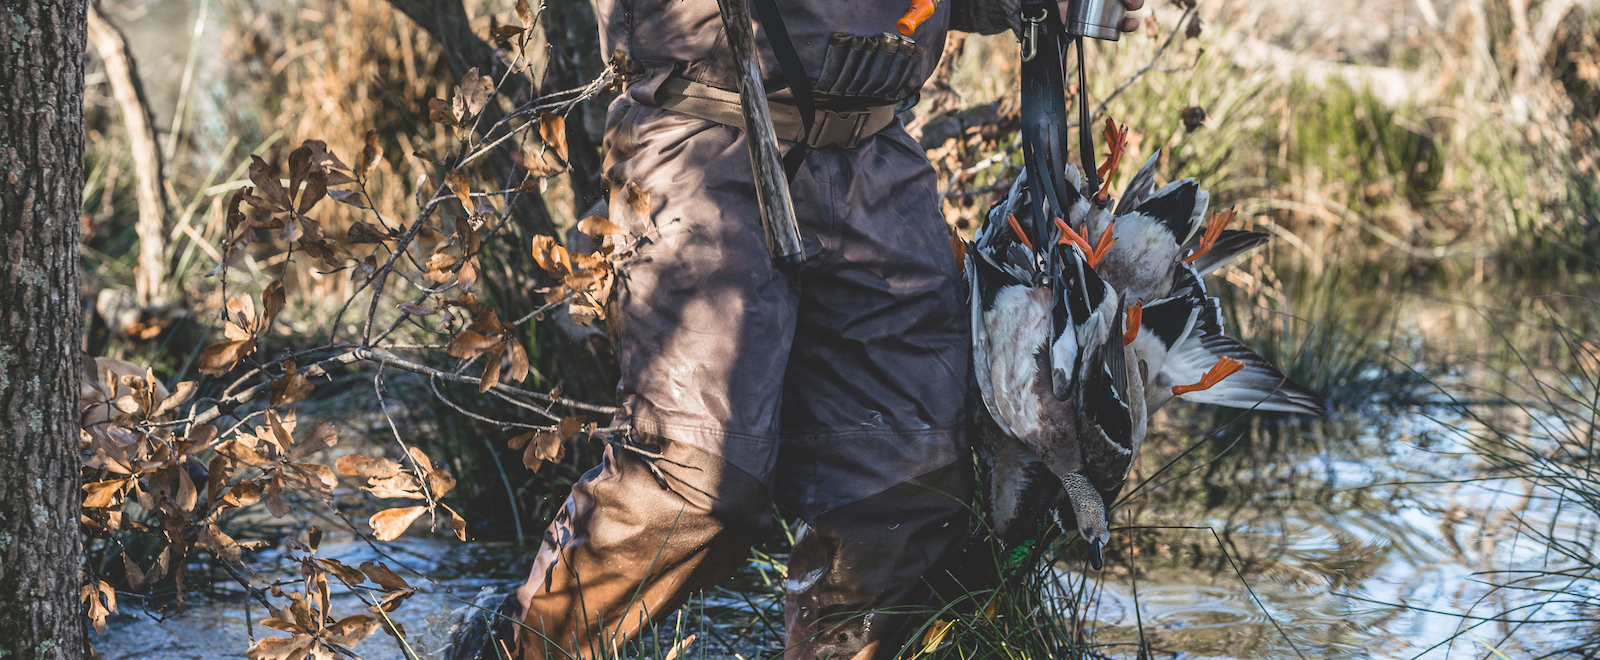 A duck hunter wearing breathable waders walks through flooded timber